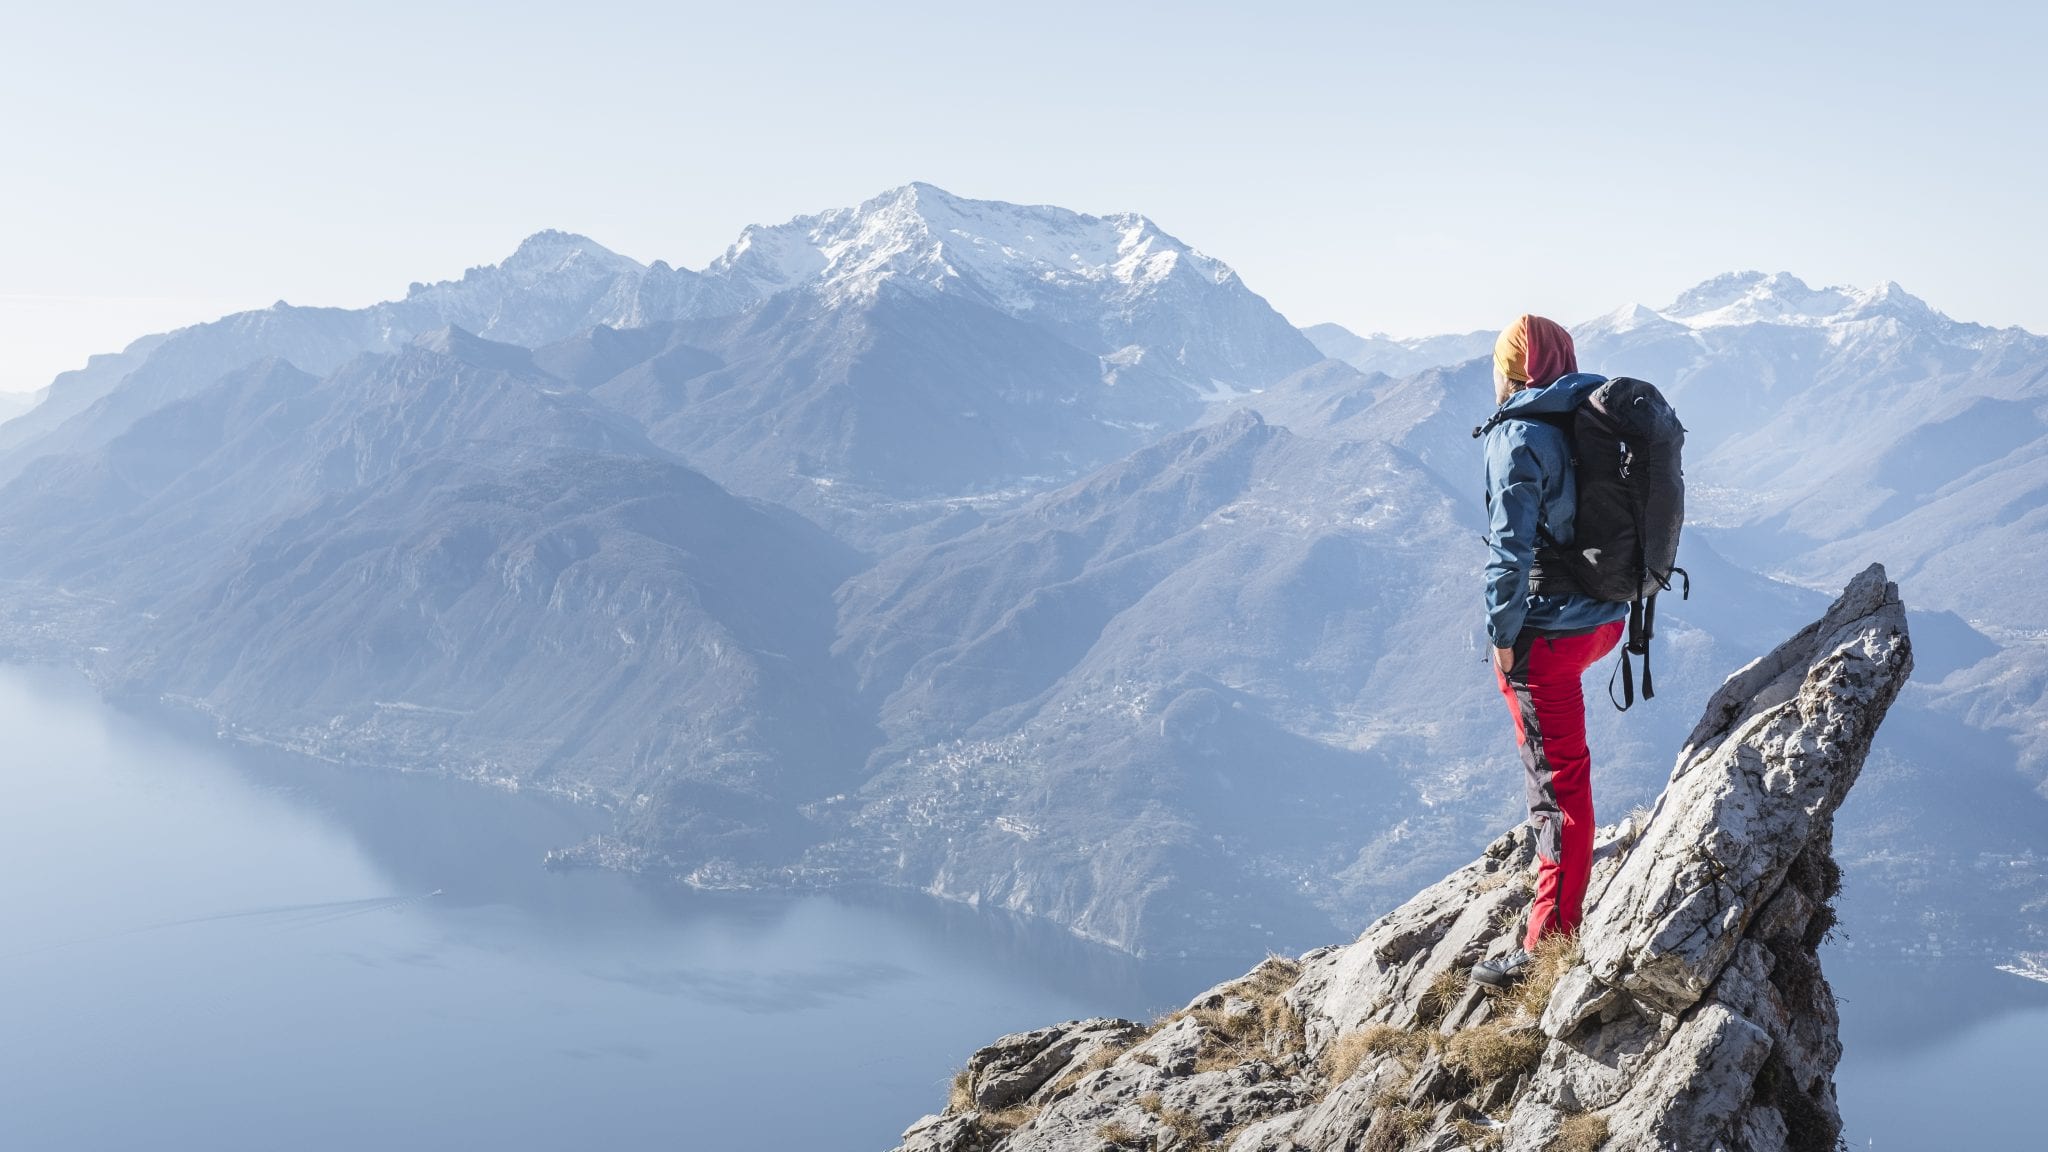 Heidi Zimmer standing at the top of a tall mountain looking out over an expanse of sea and rocky mountains.